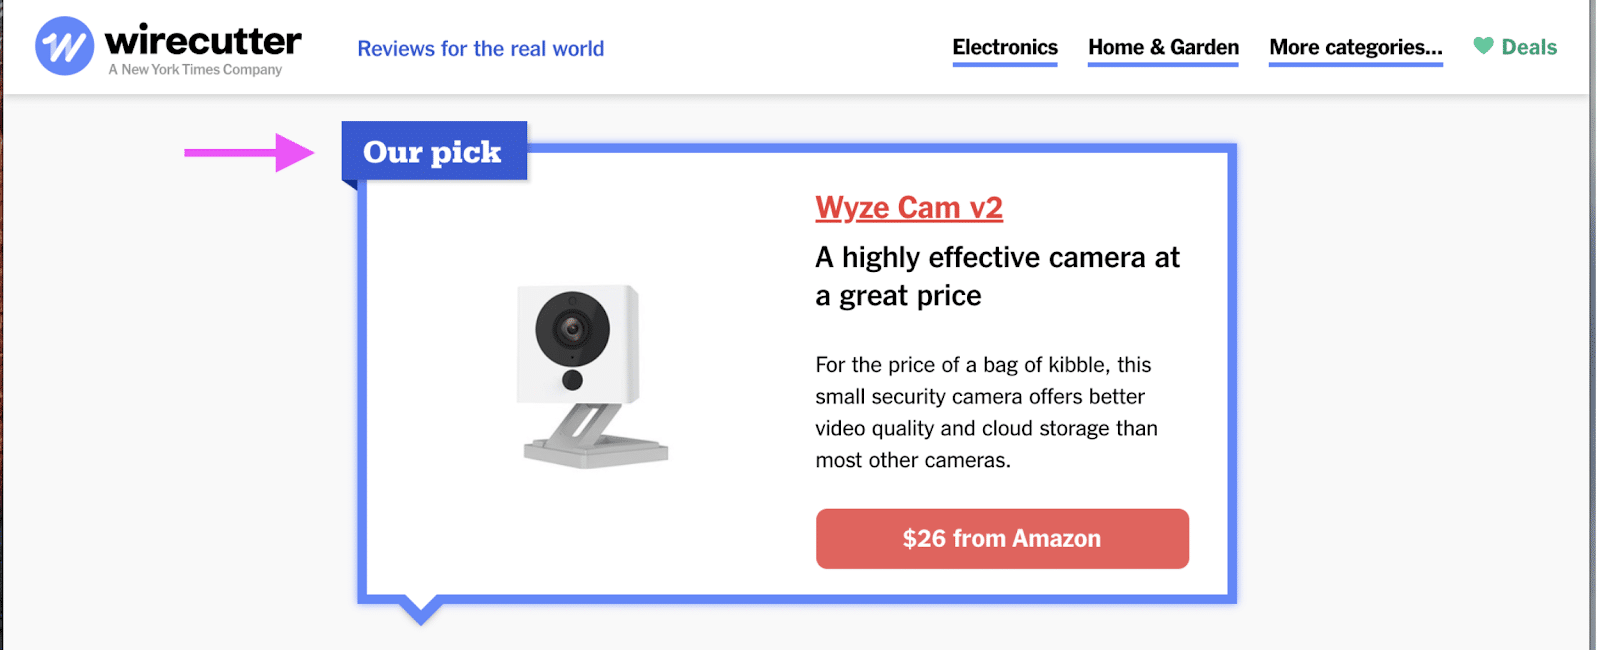 wirecutter example mobile friendly website